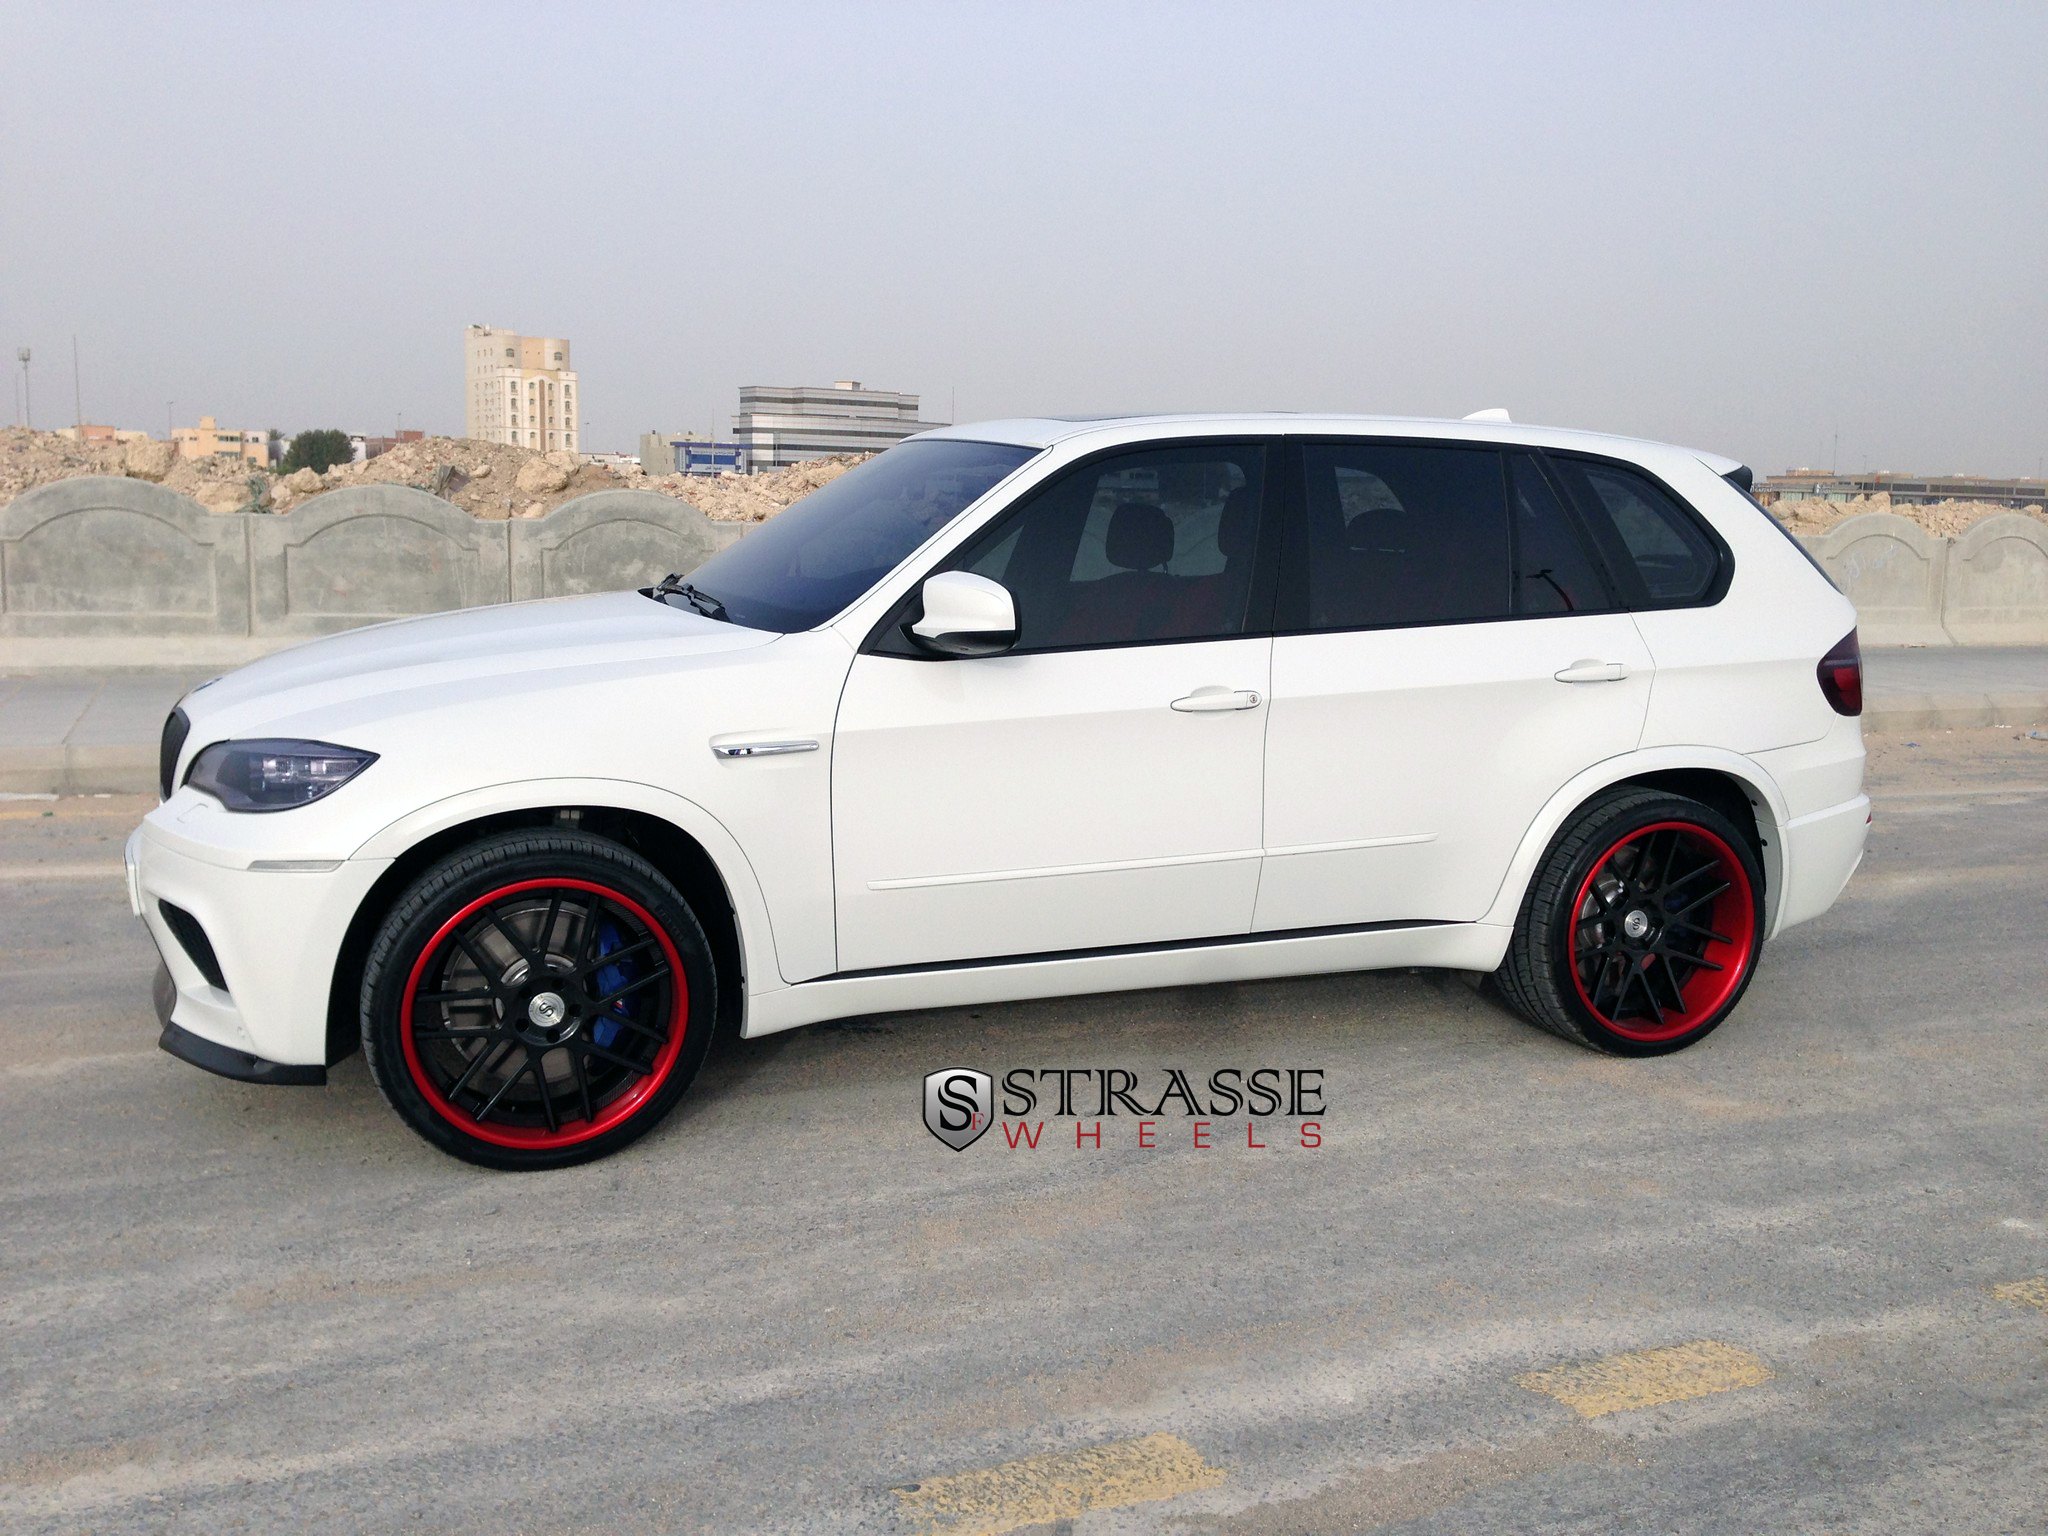 Aftermarket Side Skirts on White BMW X5 - Photo by Strasse Forged